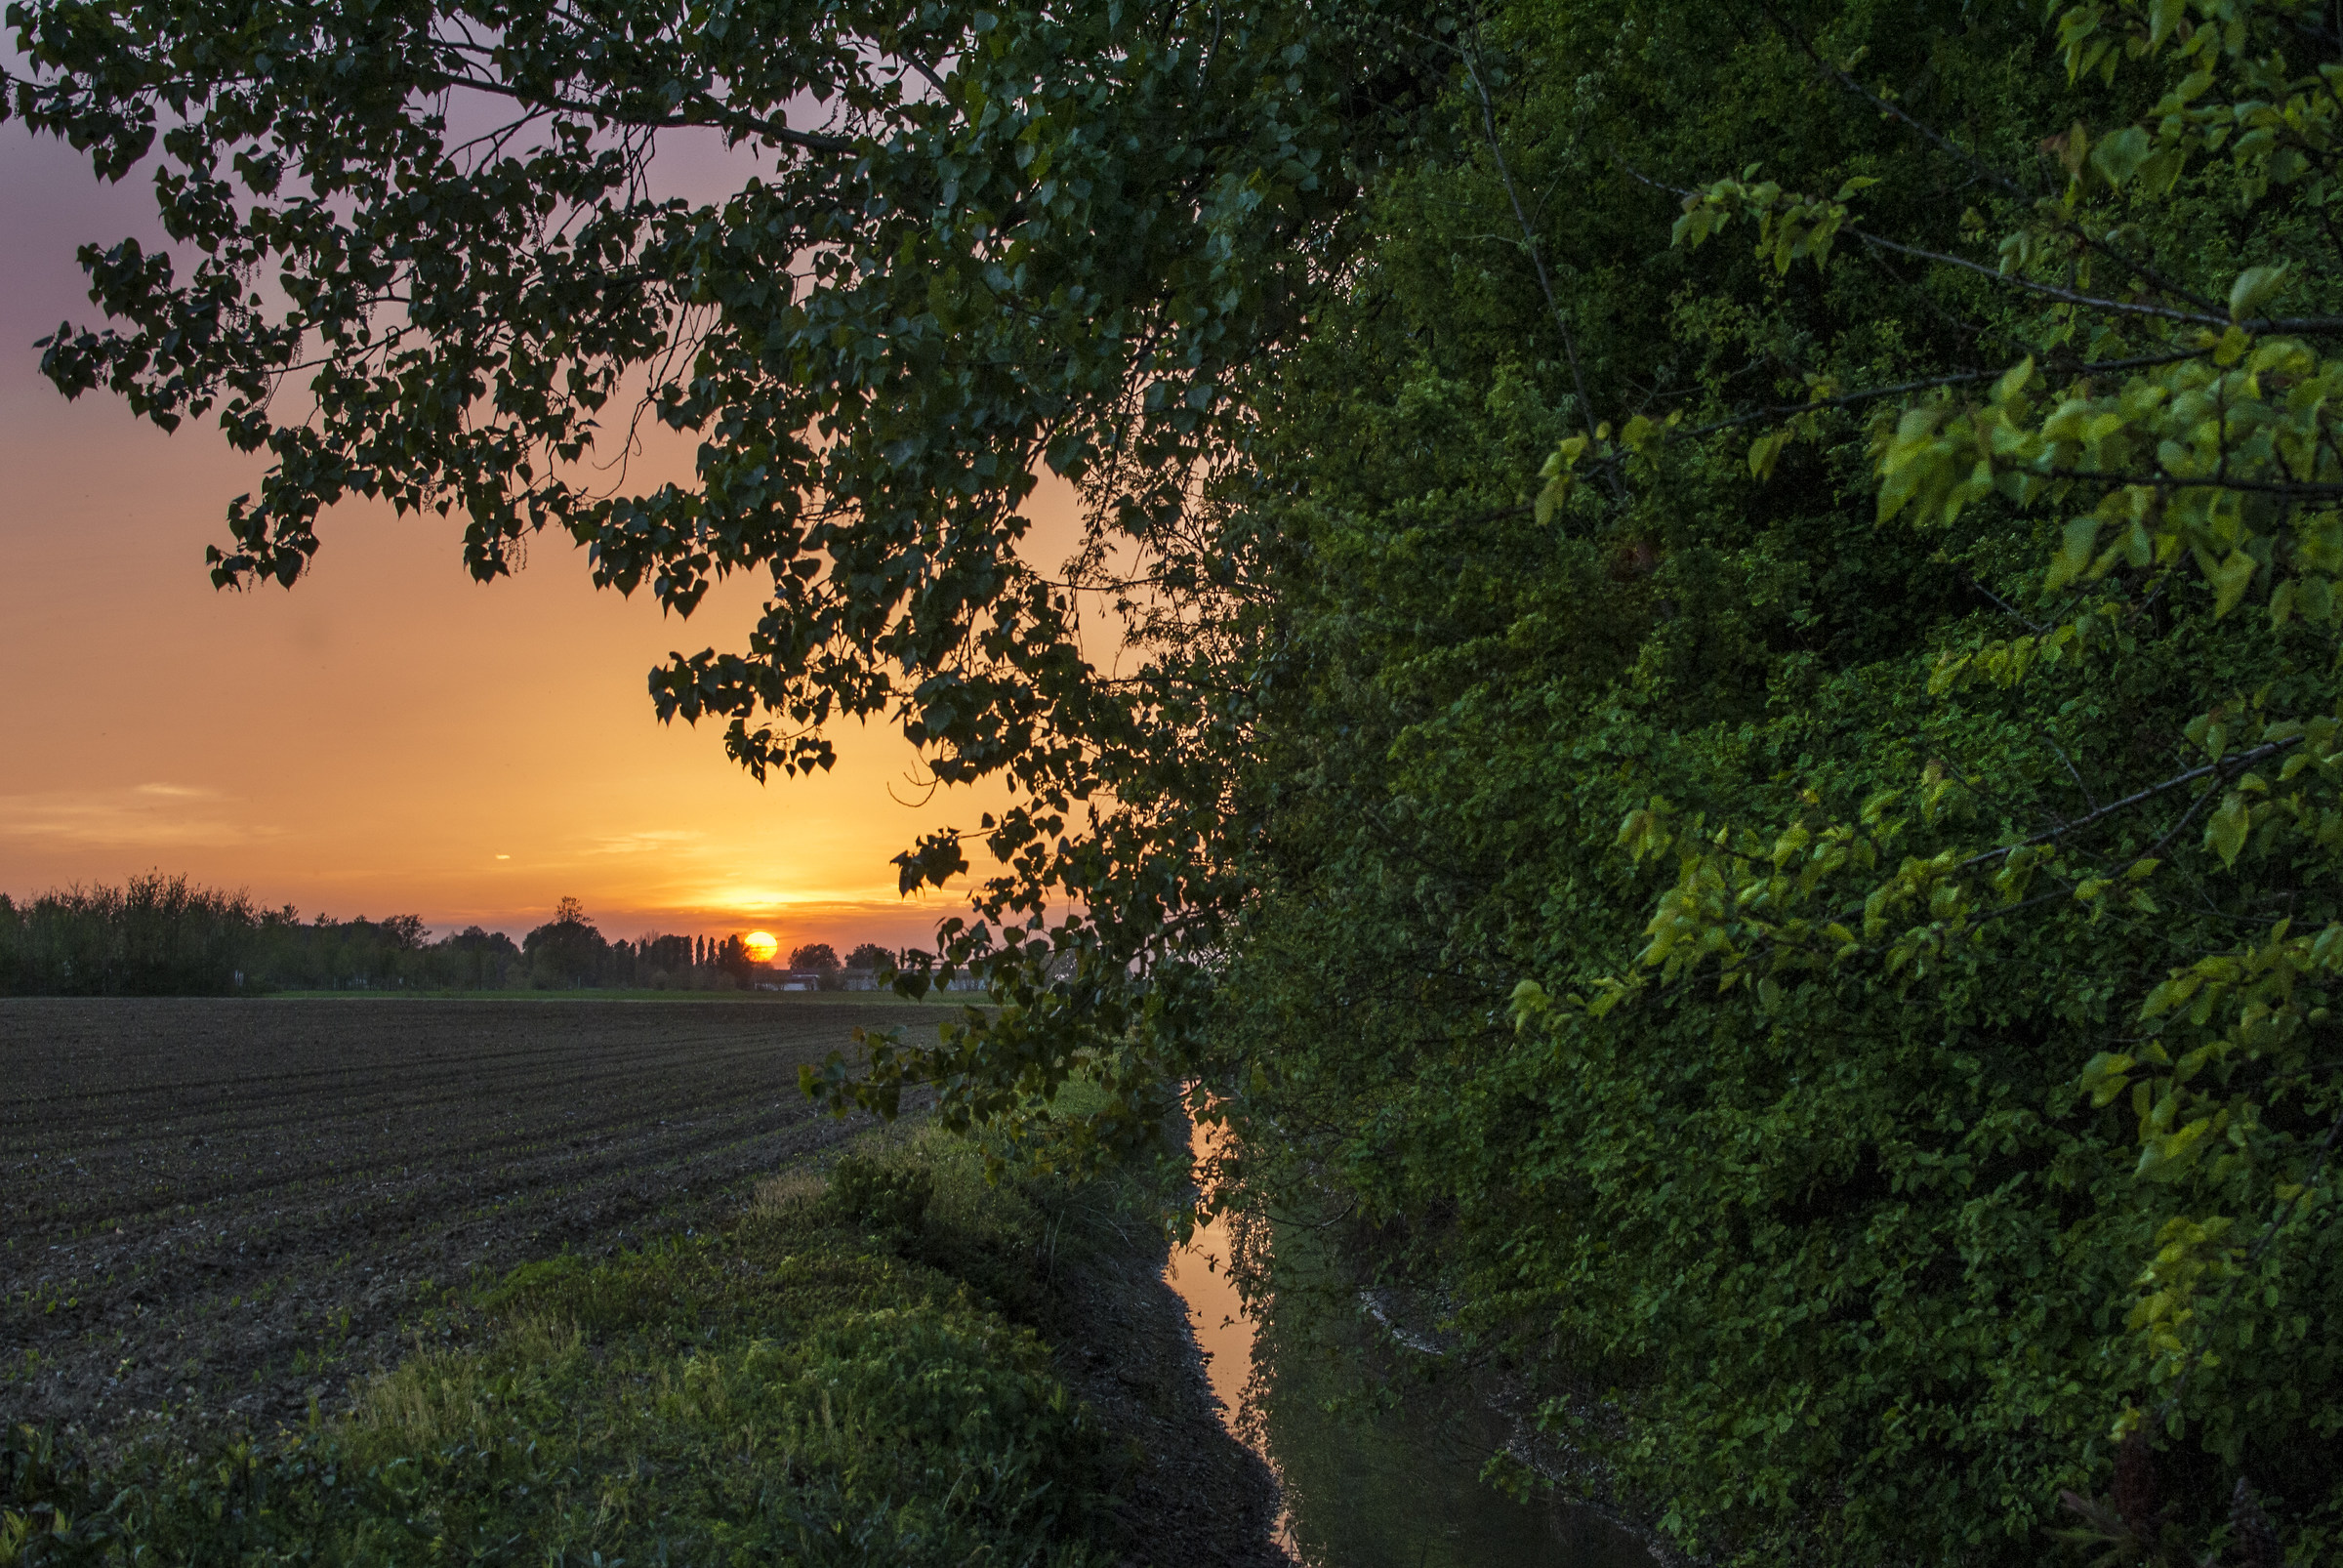 sunset in the countryside...